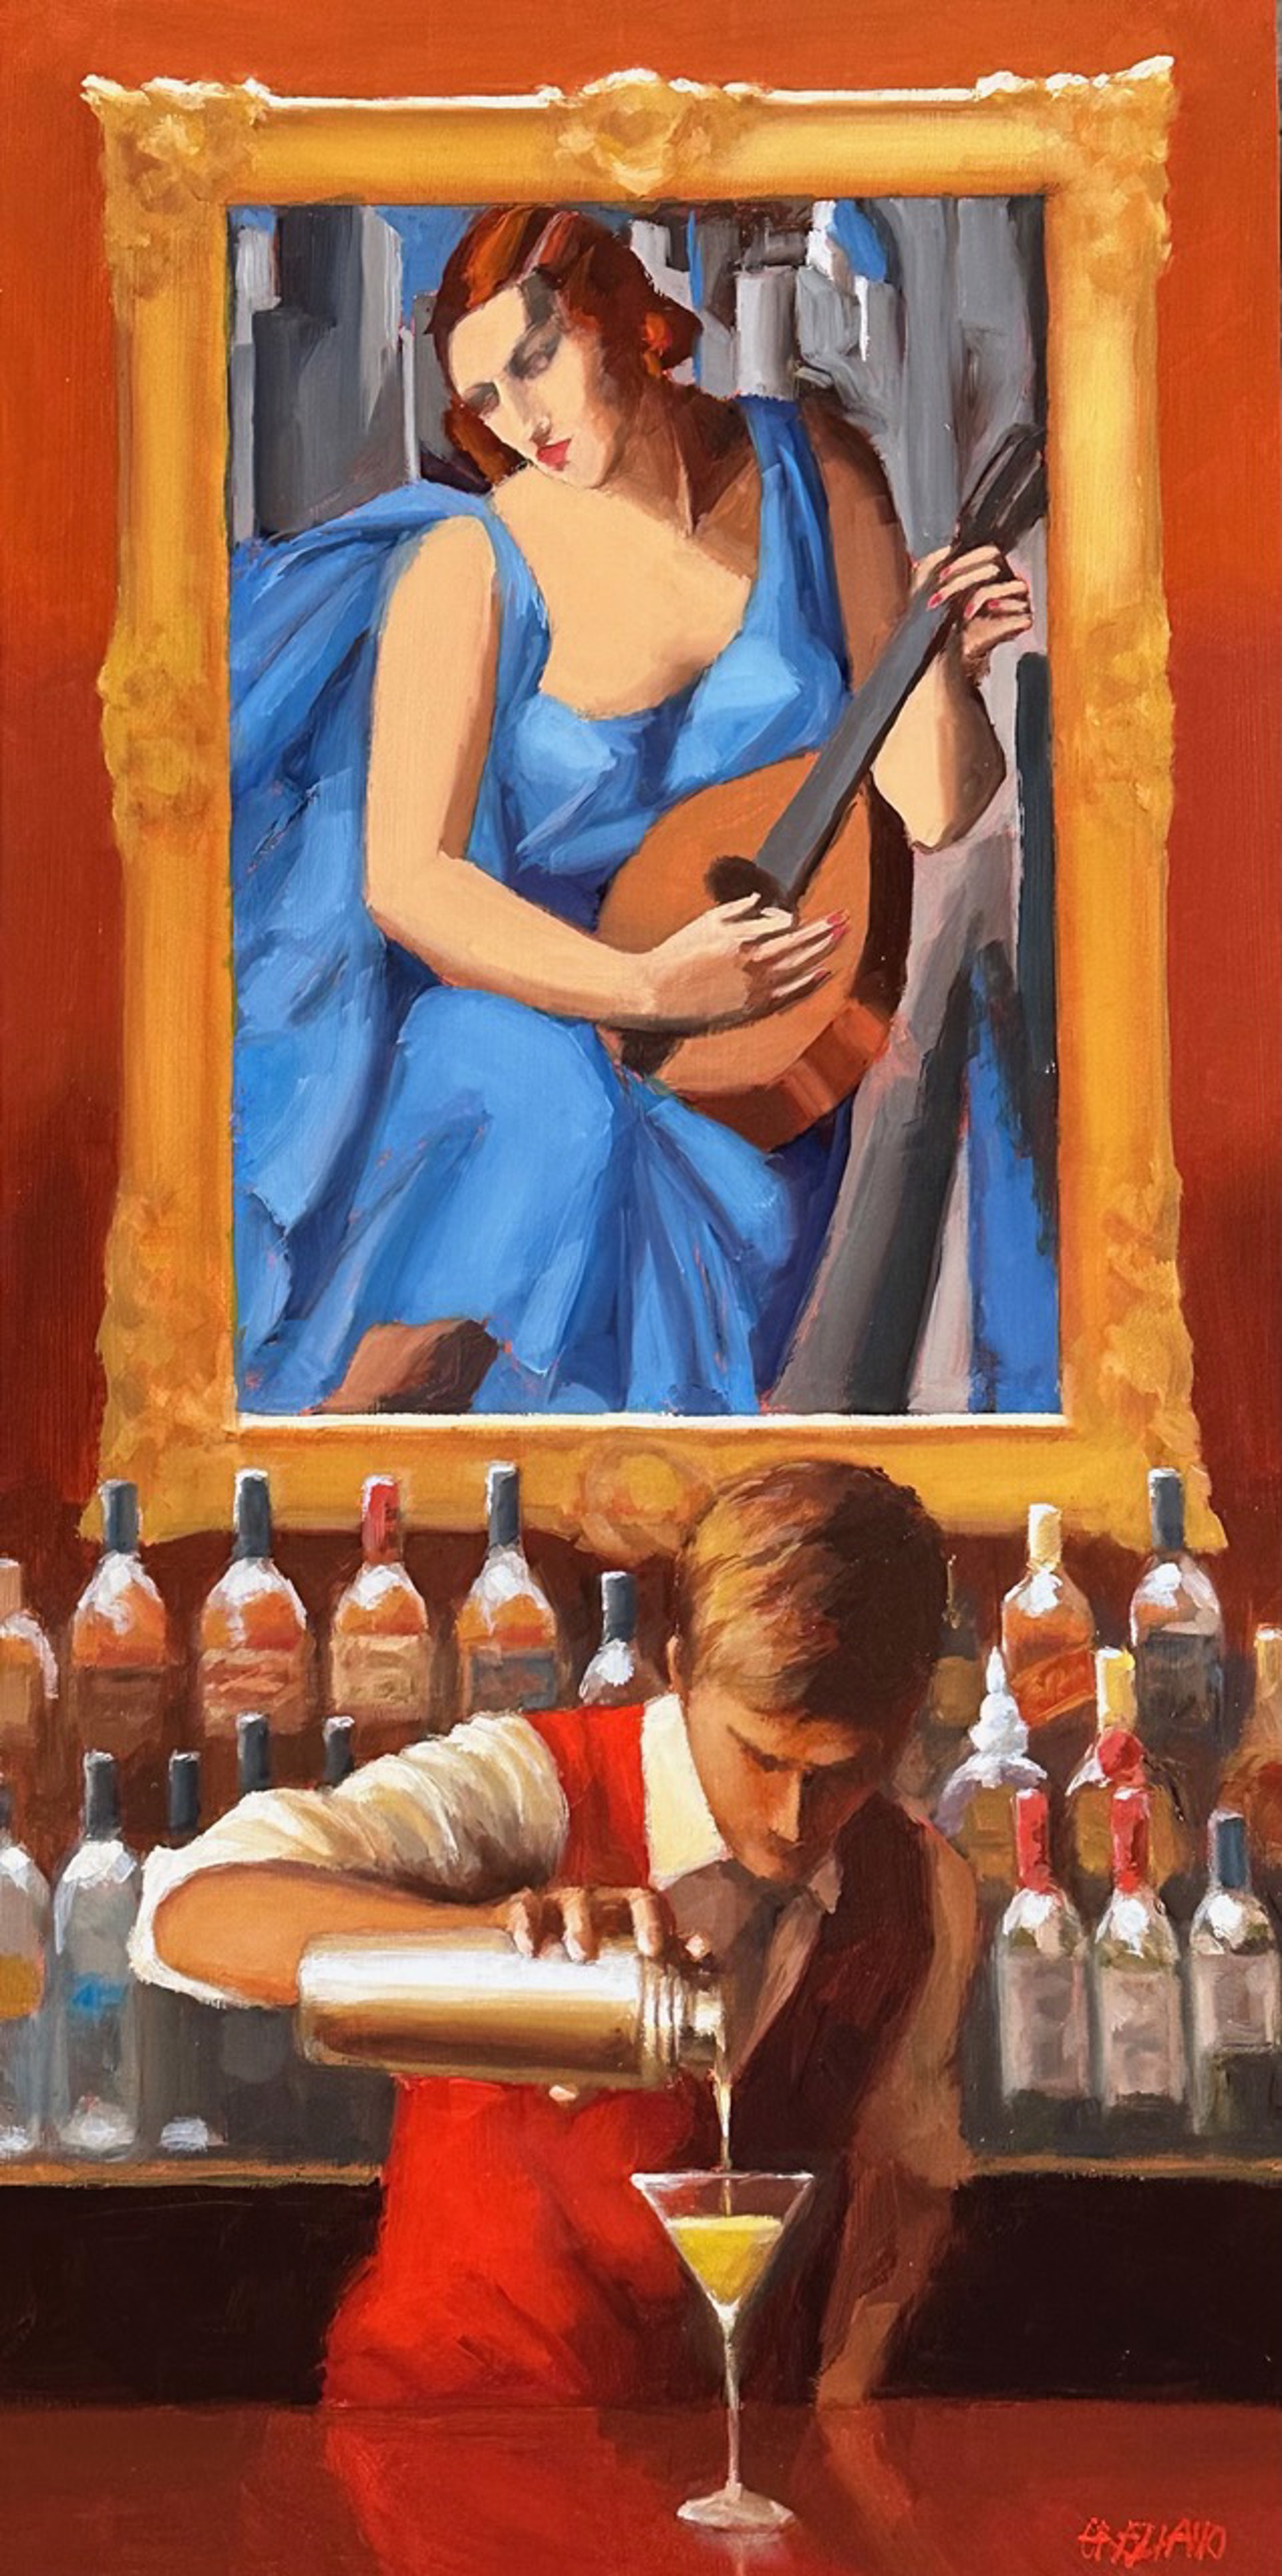 Cocktail for the Lady in Blue by Dan Graziano